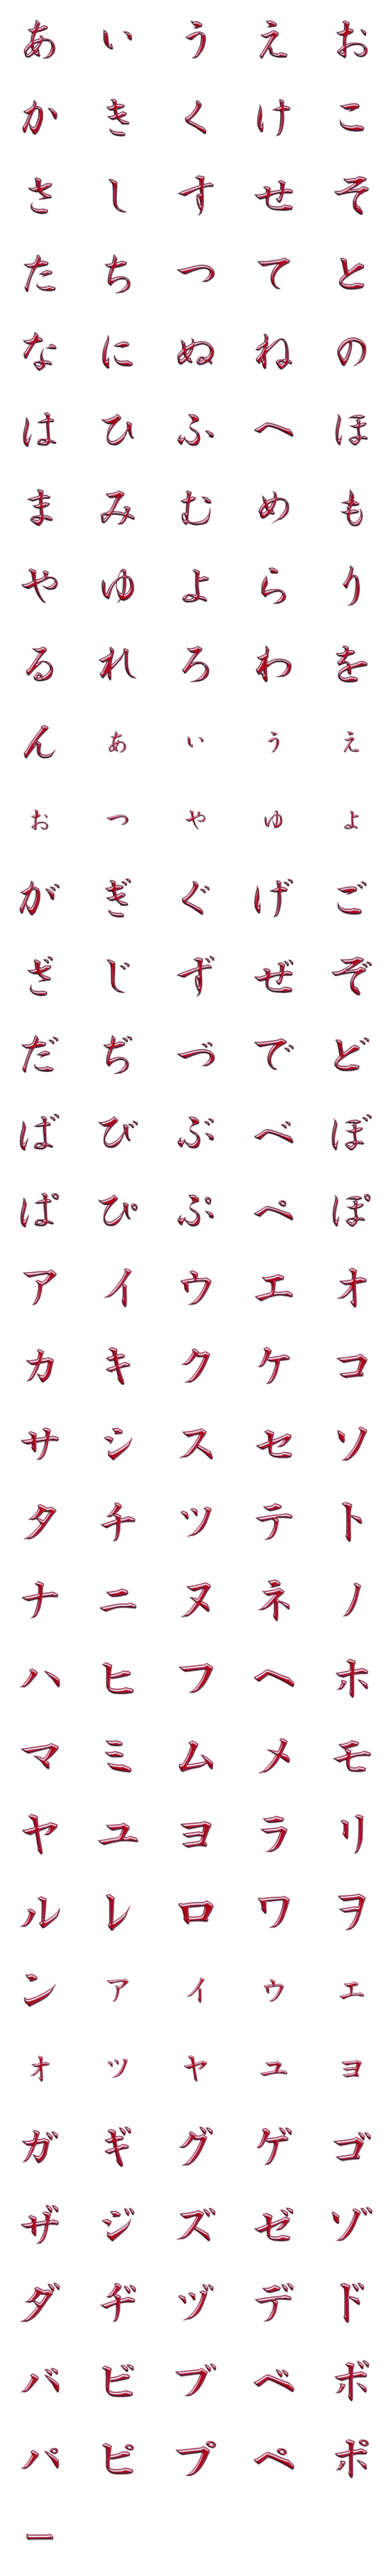 [LINE絵文字]三好一族の絵文字02の画像一覧